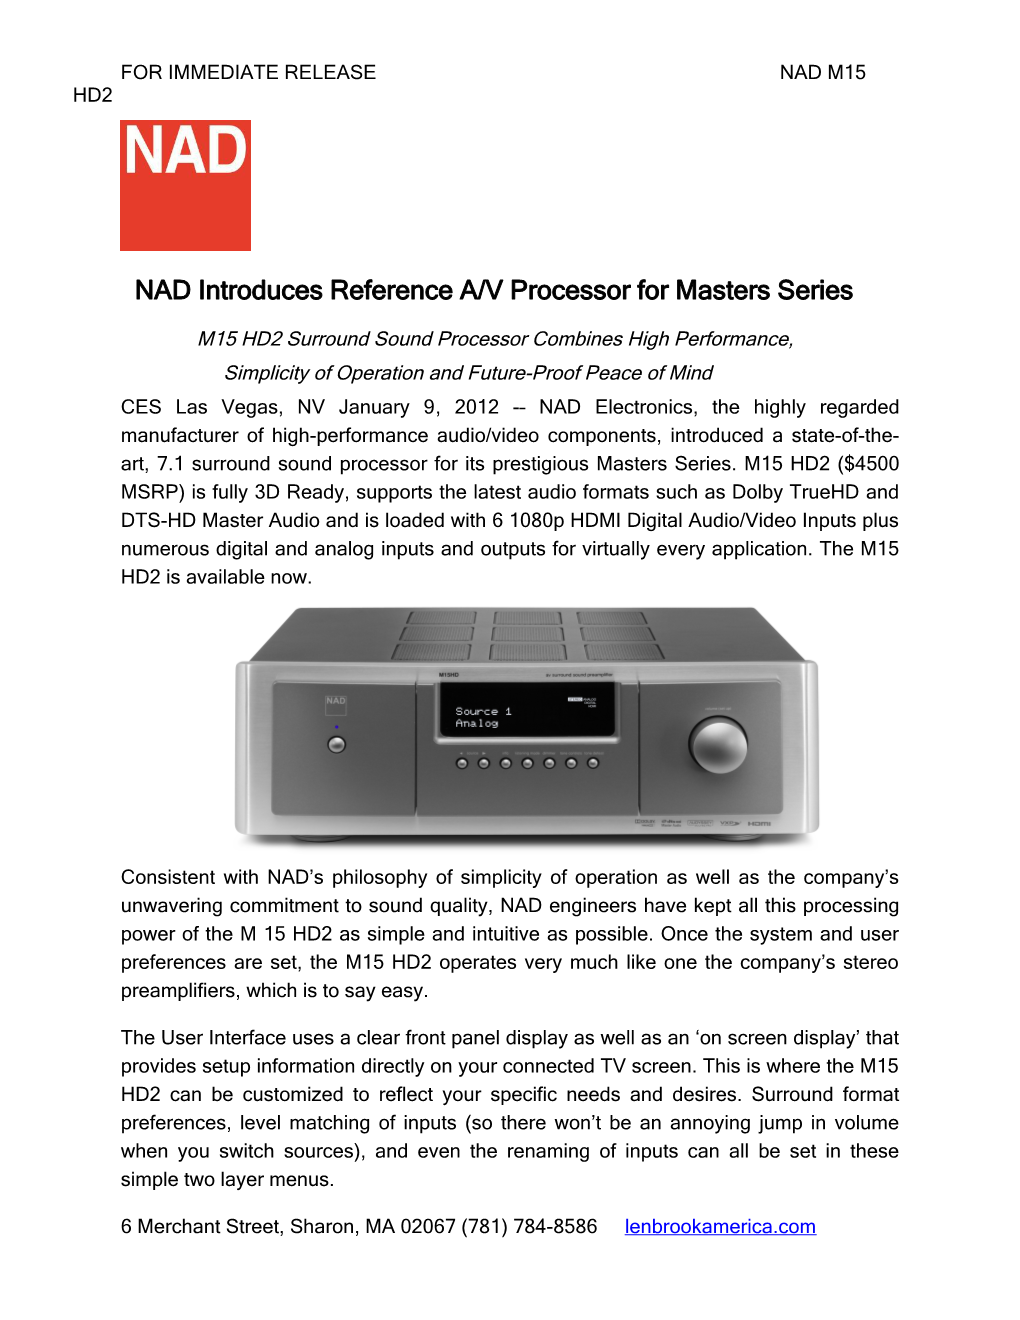 NAD Introduces Reference A/V Processor for Masters Series